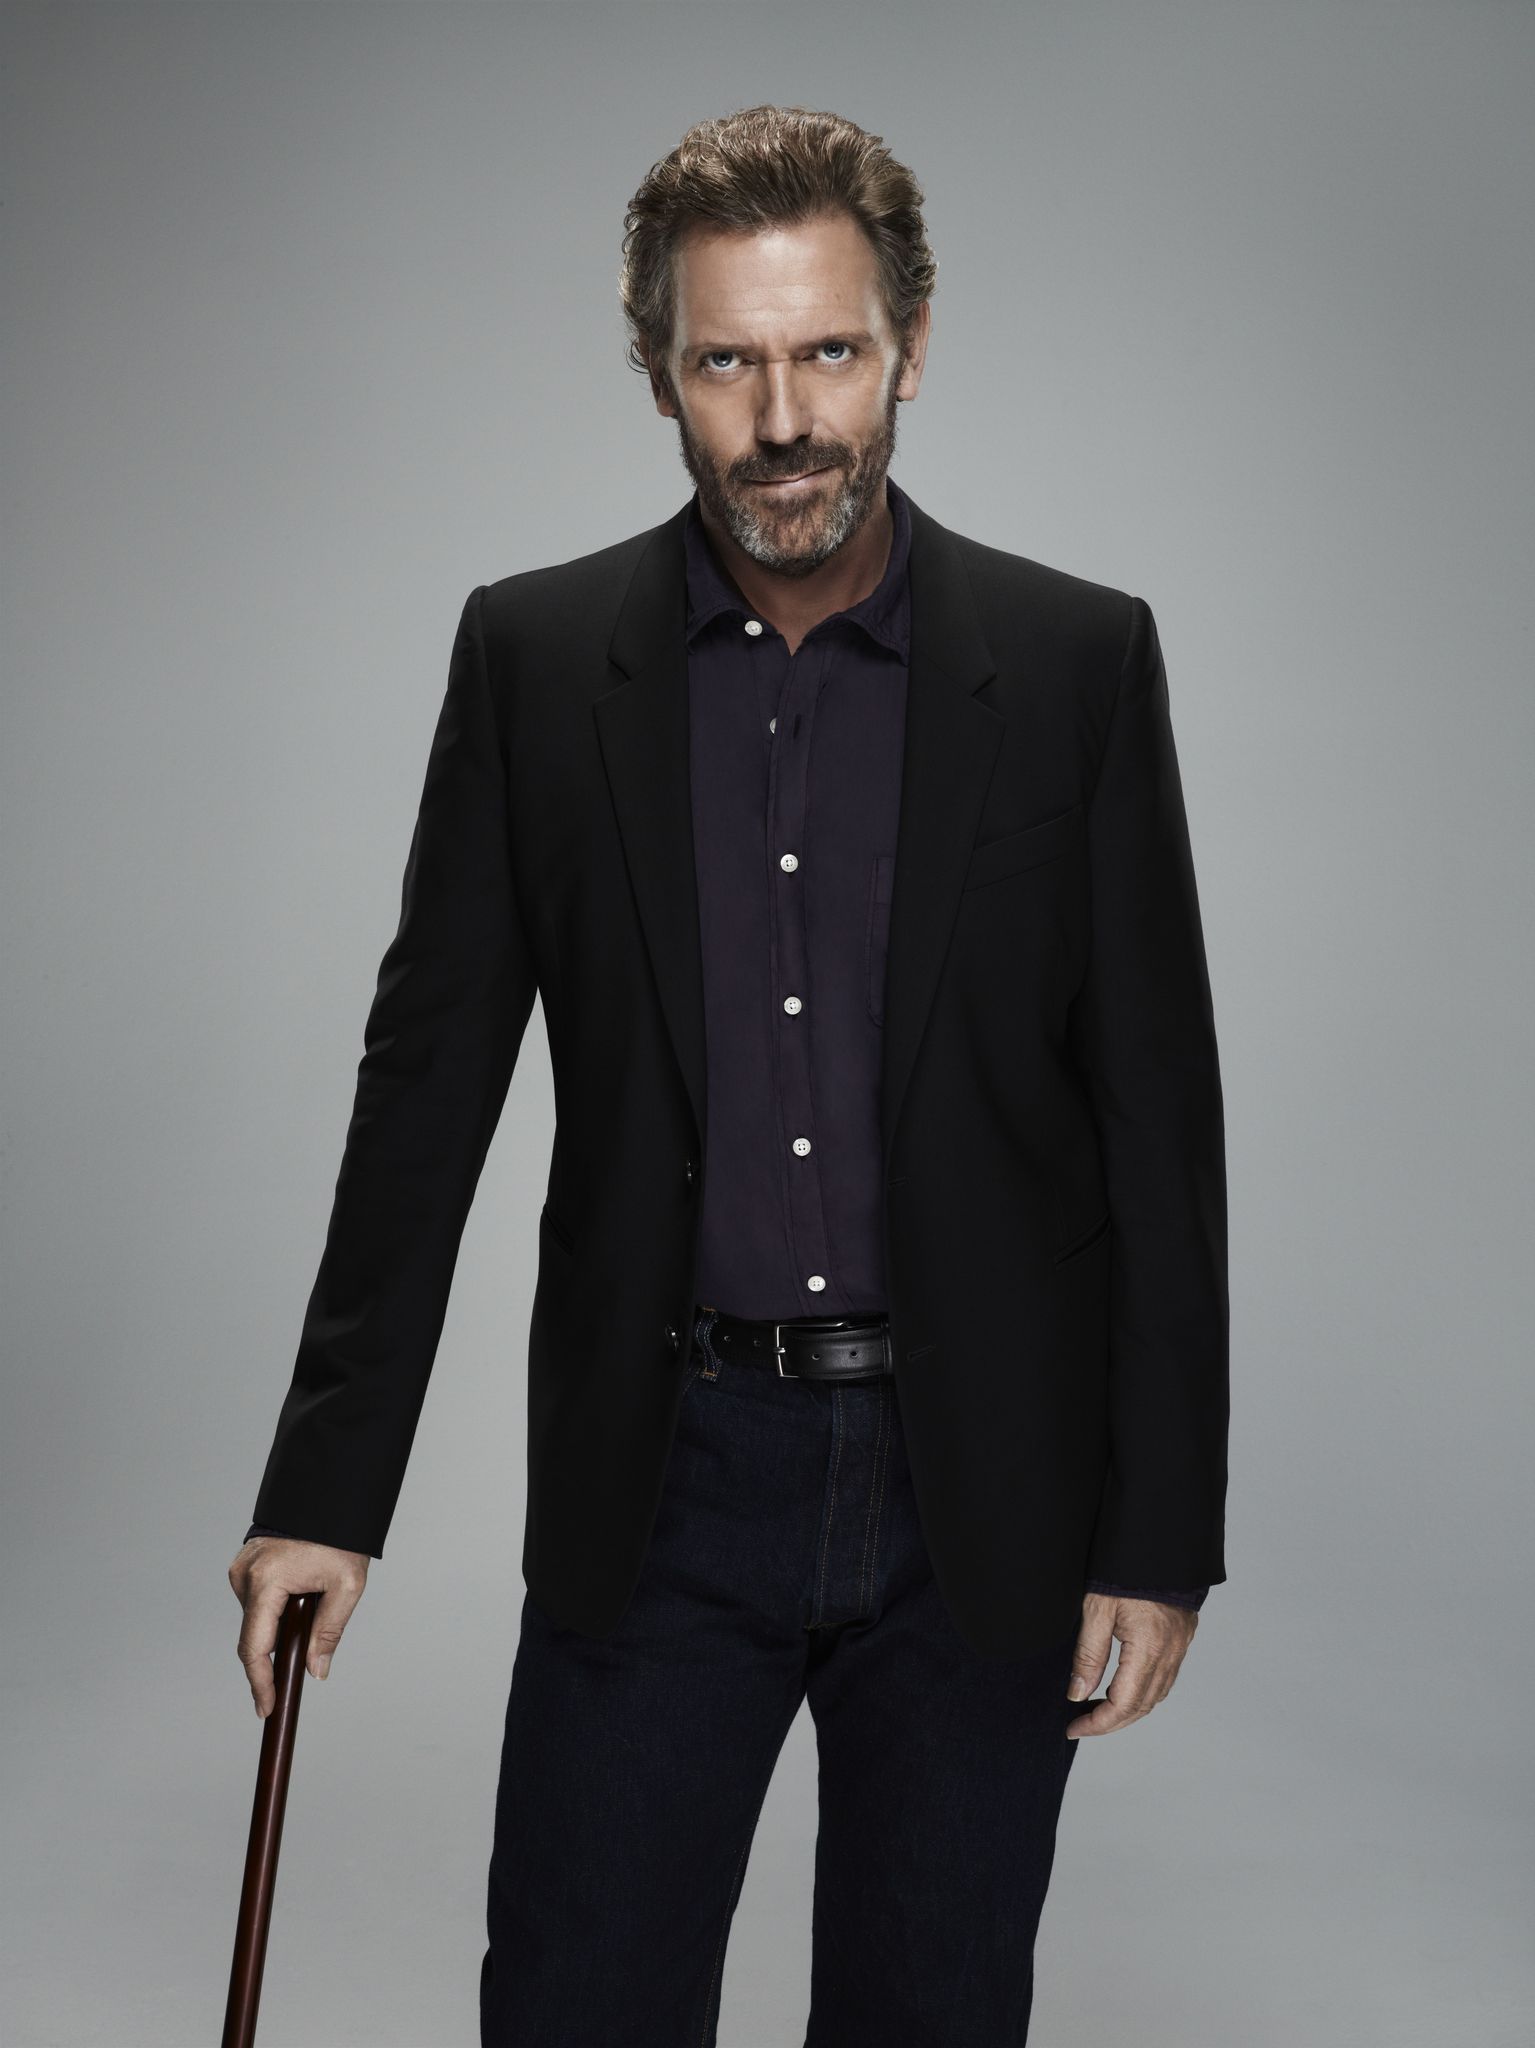 Dr. Gregory House Costume, Carbon Costume